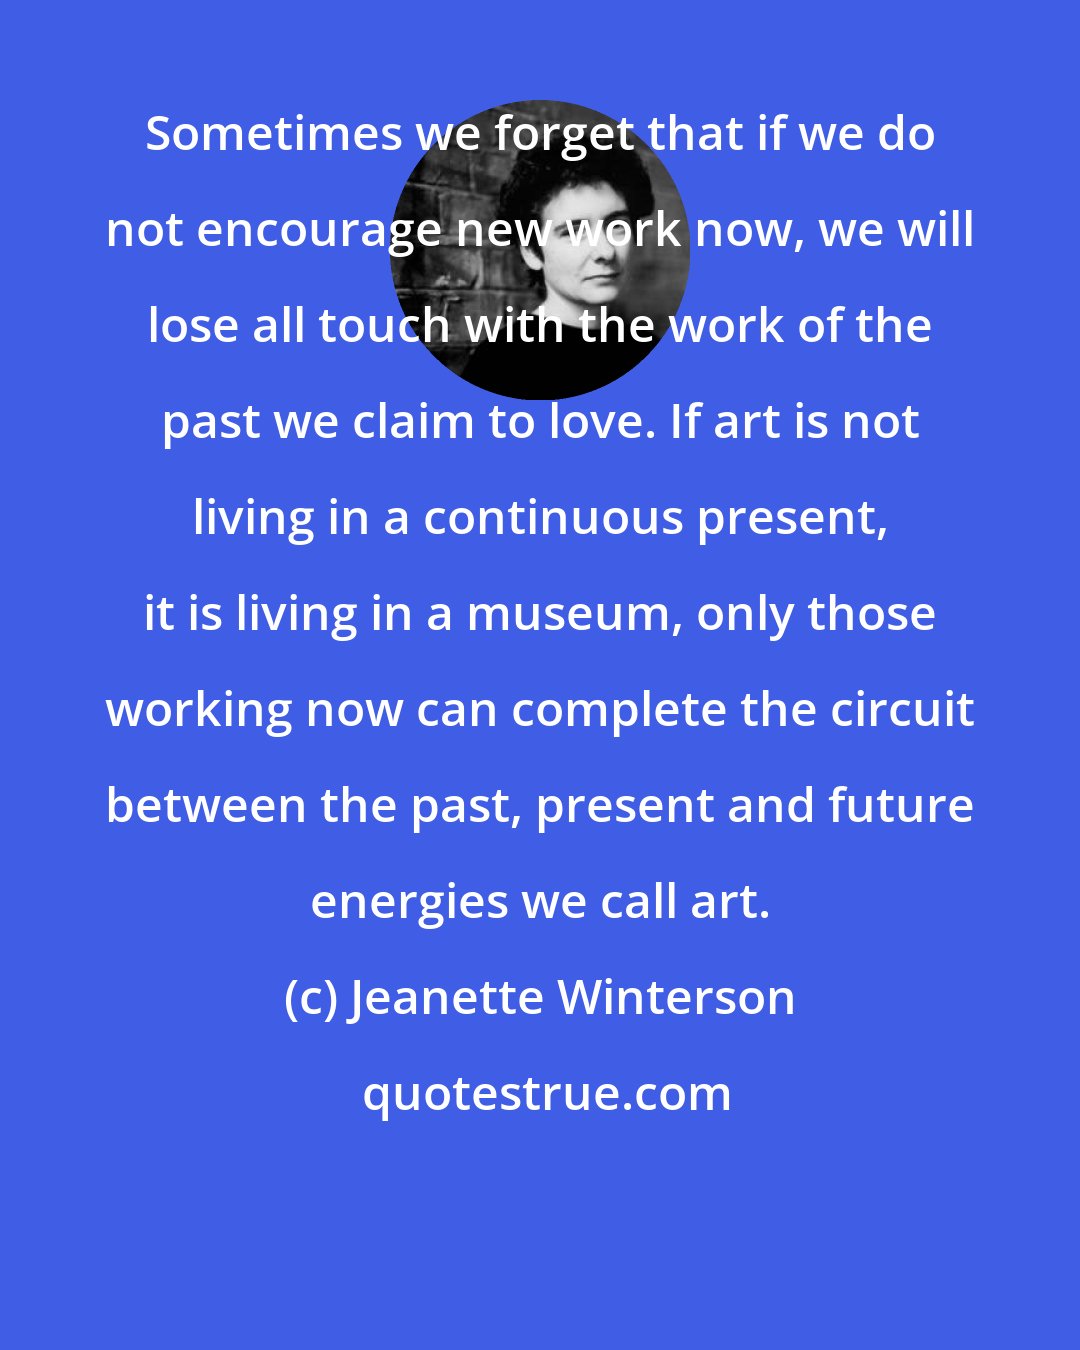 Jeanette Winterson: Sometimes we forget that if we do not encourage new work now, we will lose all touch with the work of the past we claim to love. If art is not living in a continuous present, it is living in a museum, only those working now can complete the circuit between the past, present and future energies we call art.